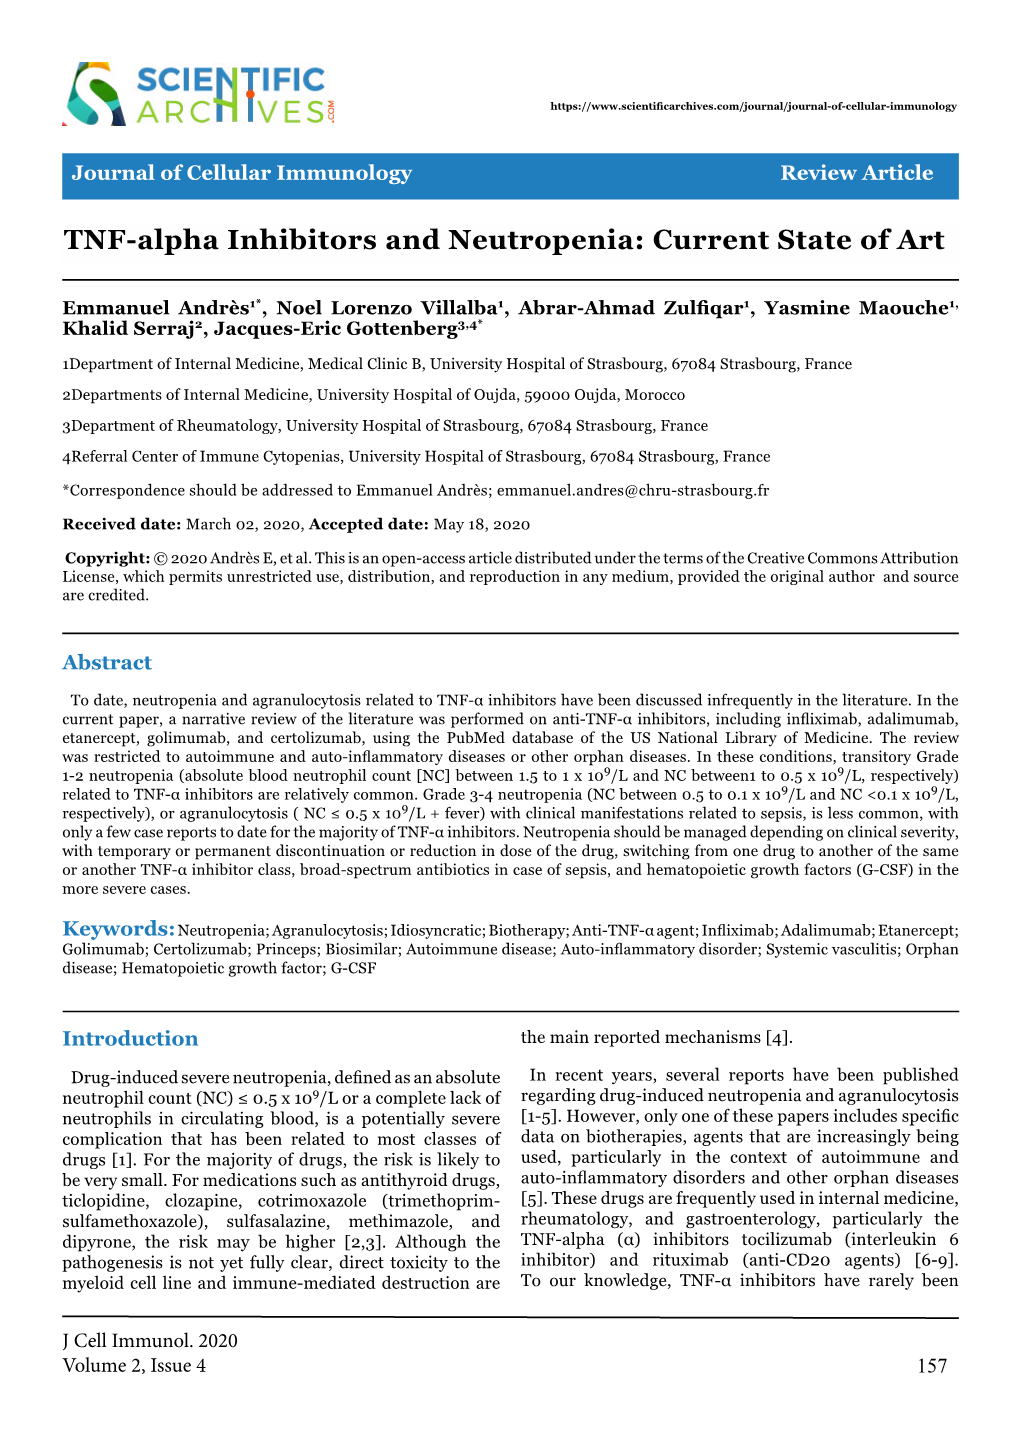 TNF-Alpha Inhibitors and Neutropenia: Current State of Art